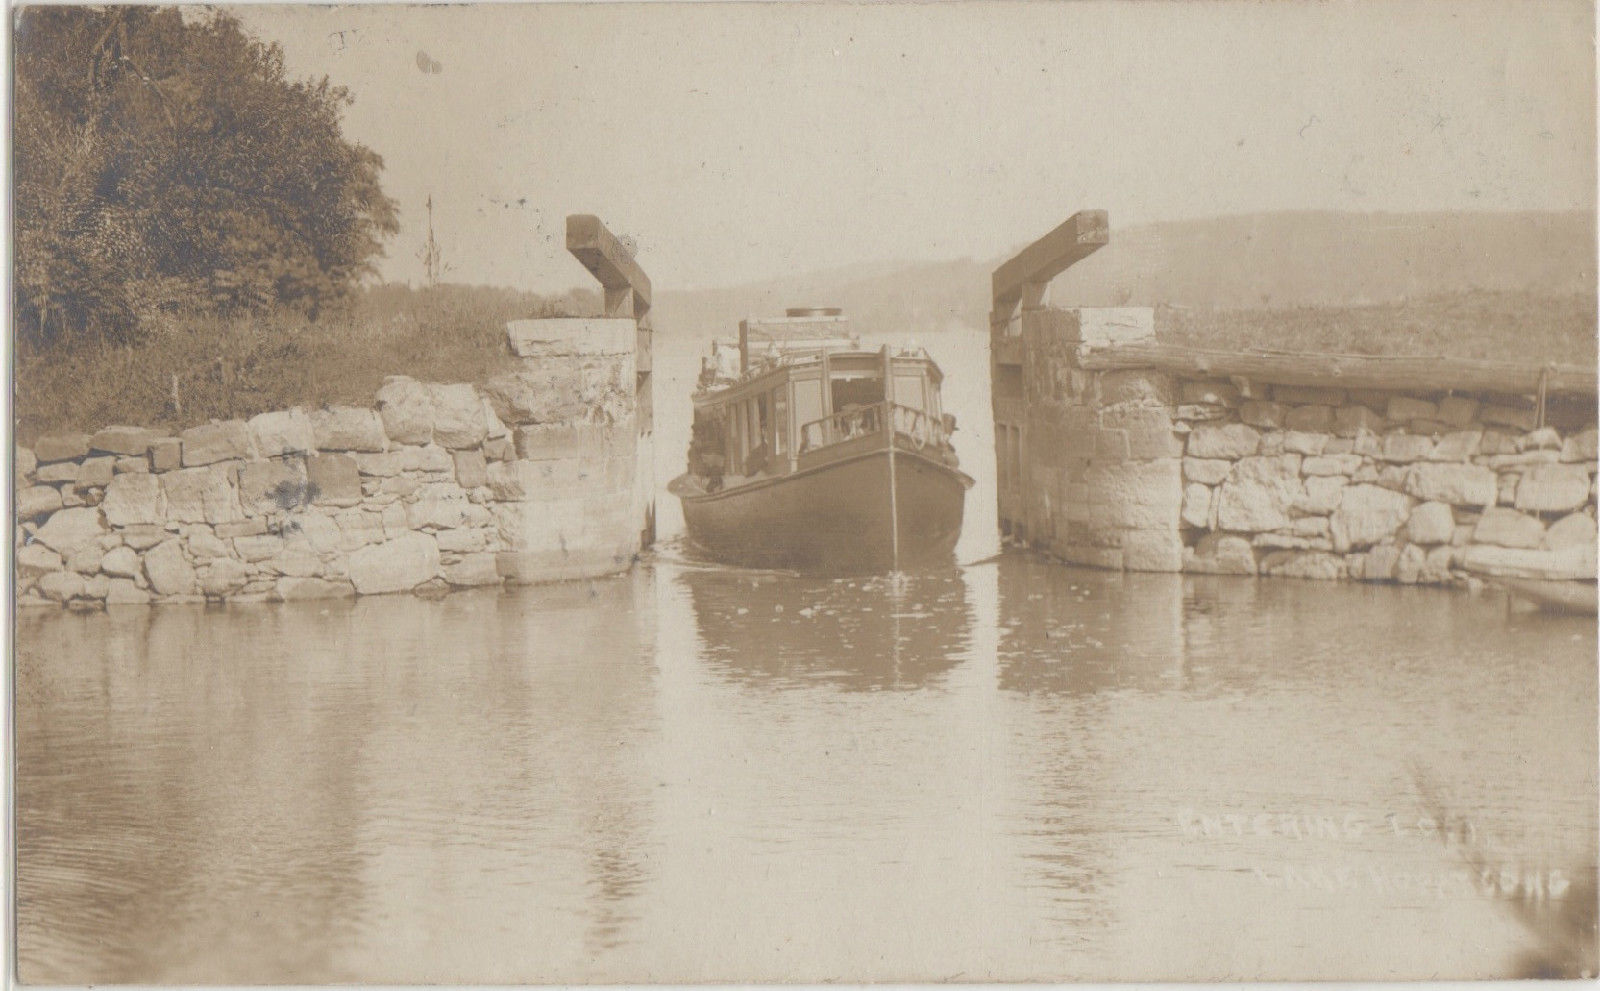 Lake Hopatcong - Boat entering a lock on the Morris Canal - c 1910 copy